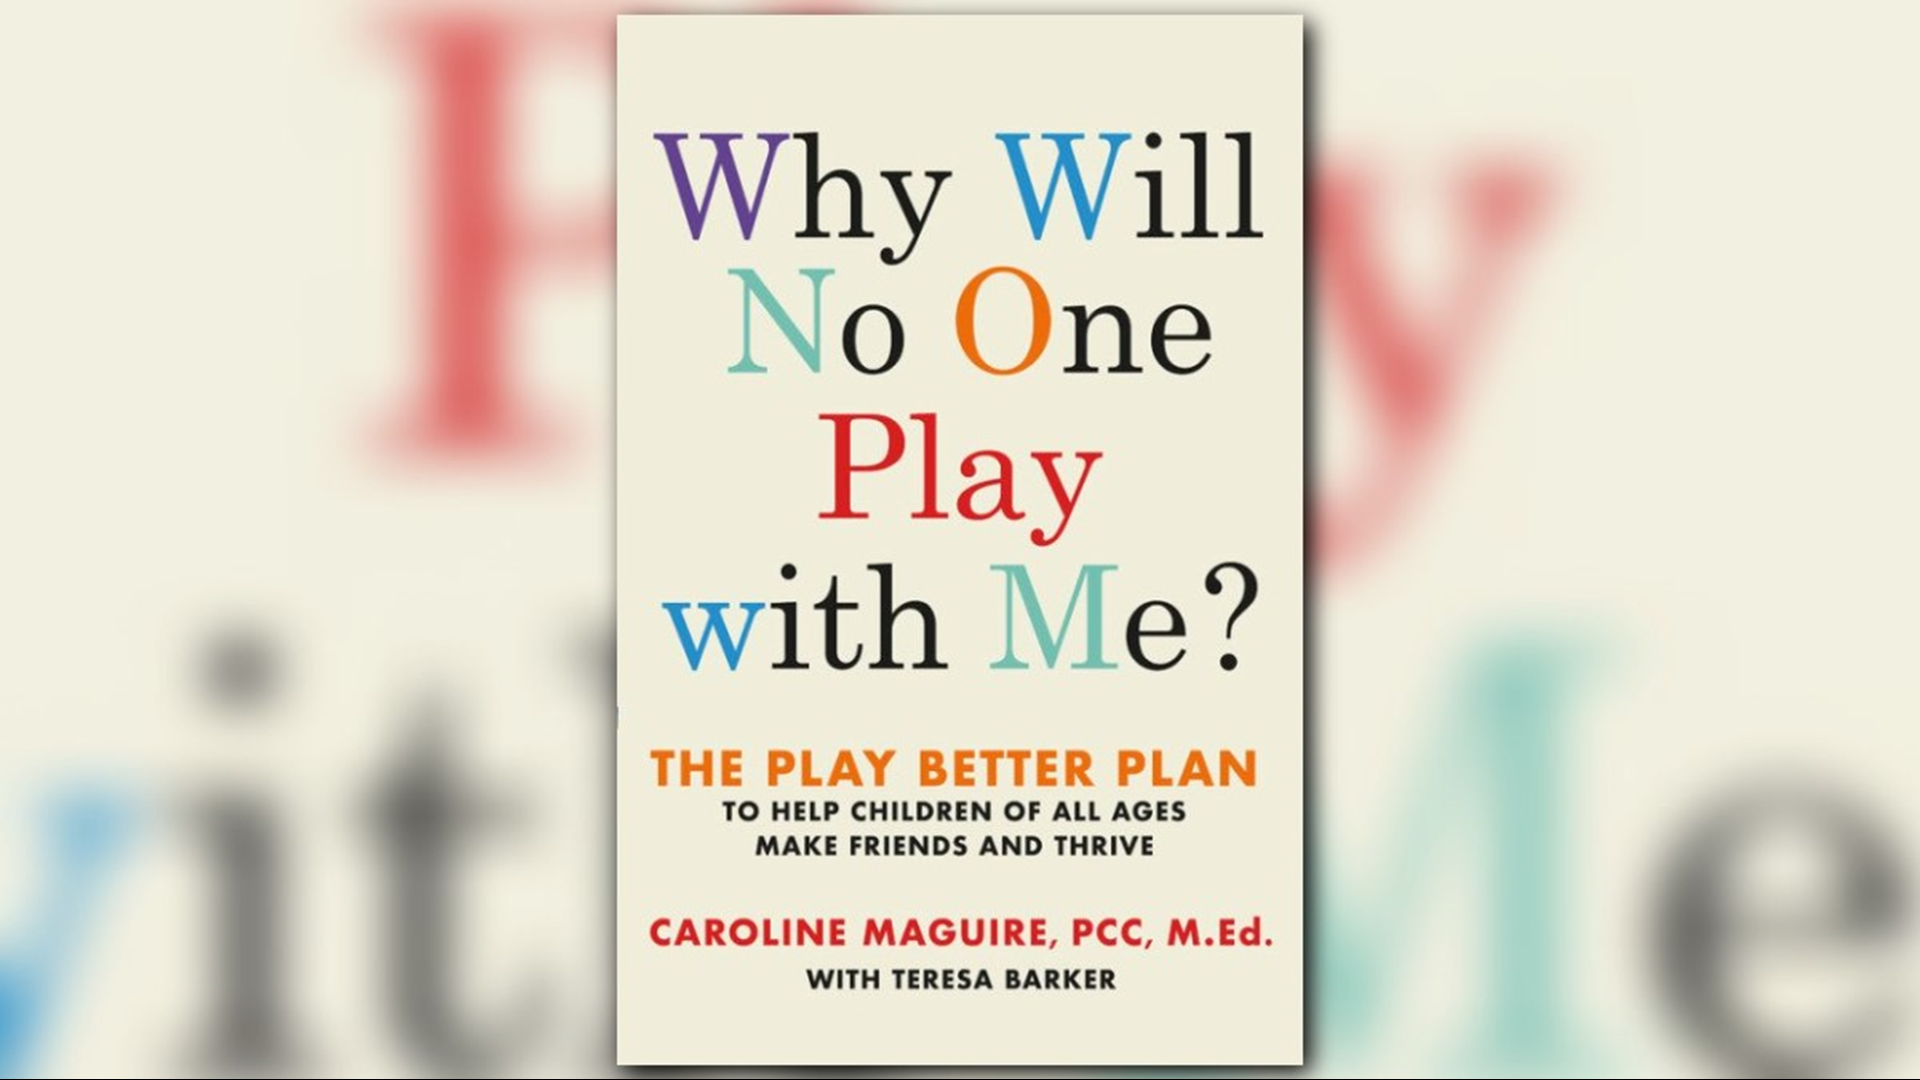 Author, Caroline Maguire, analyzes the most successful tactics for helping children succeed individually and socially in her latest book.